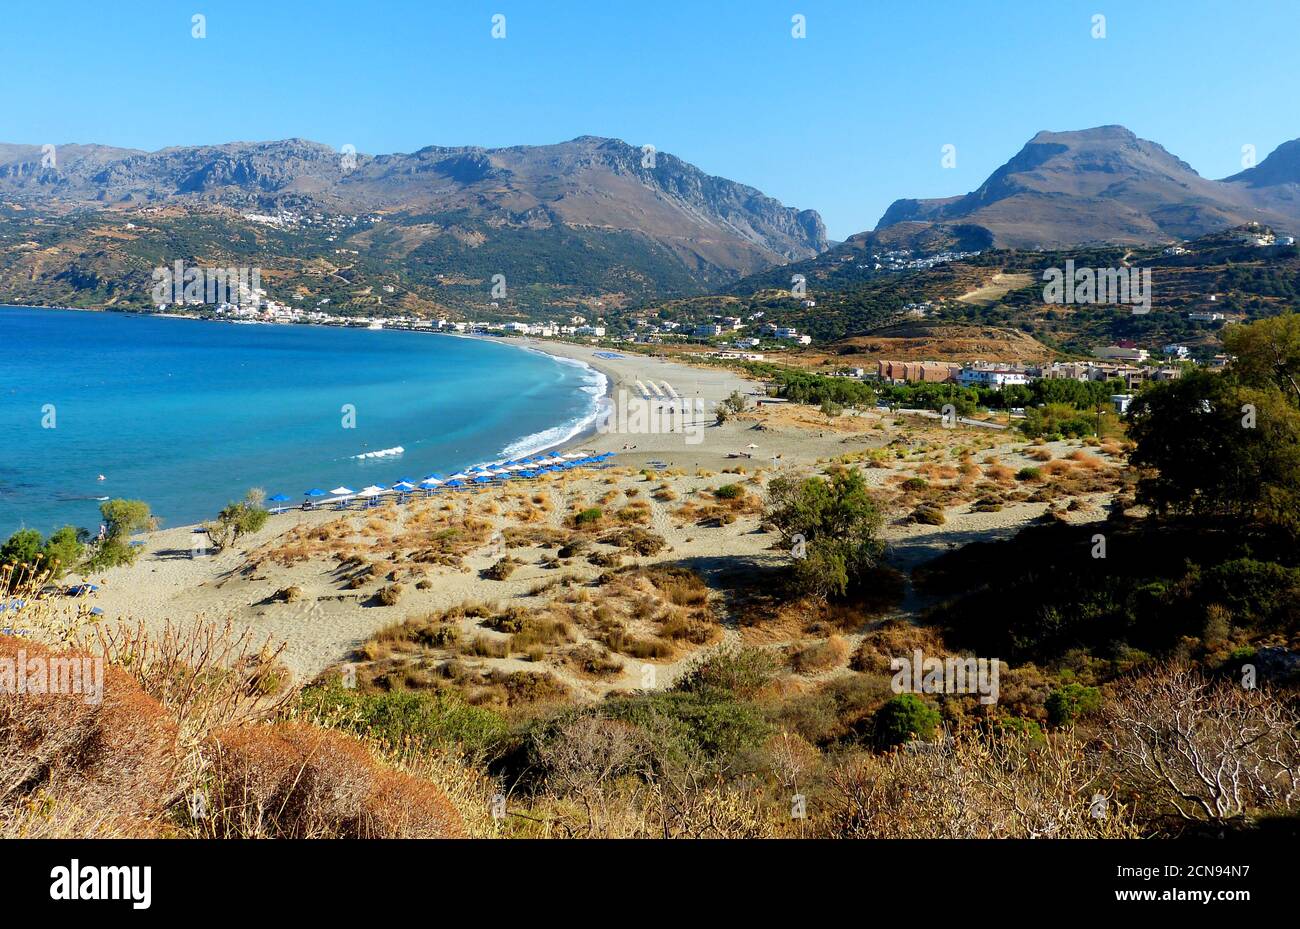 Crete island, Greece. Village Plakias is surrounded by mountains and Libyan Sea part of Mediterranean. Here 1300 metre long sandy beach. Stock Photo